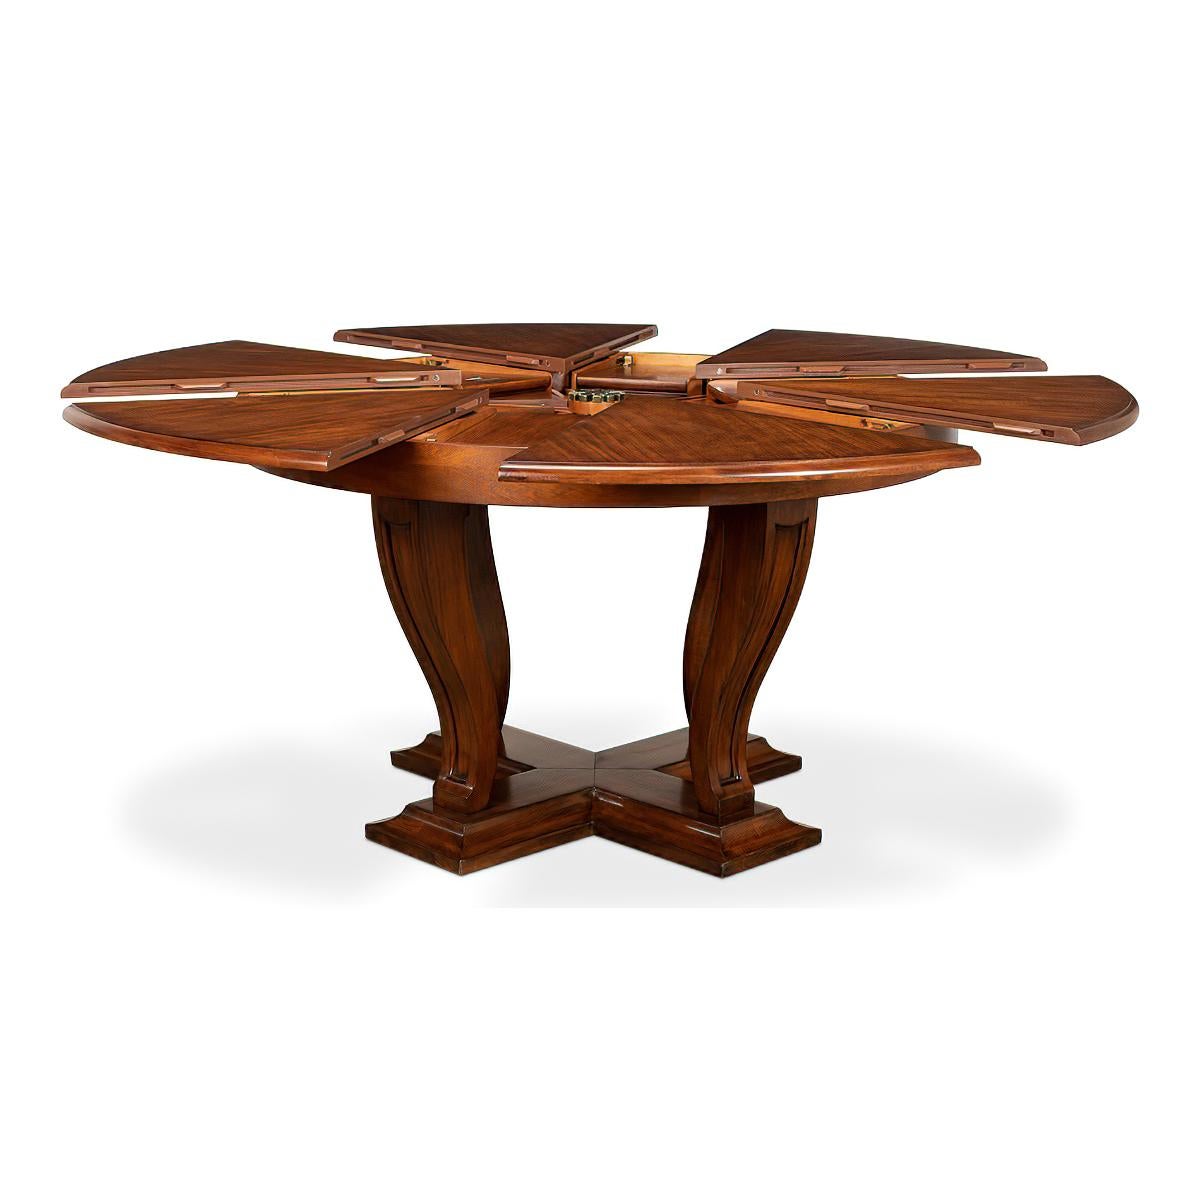 Art Deco Style walnut dining table on a transitional styled base consisting of tapered serpentine curved legs that have been carved with an inset panel design. They sit on a platform base that has been framed with a bold cove shape. The top is